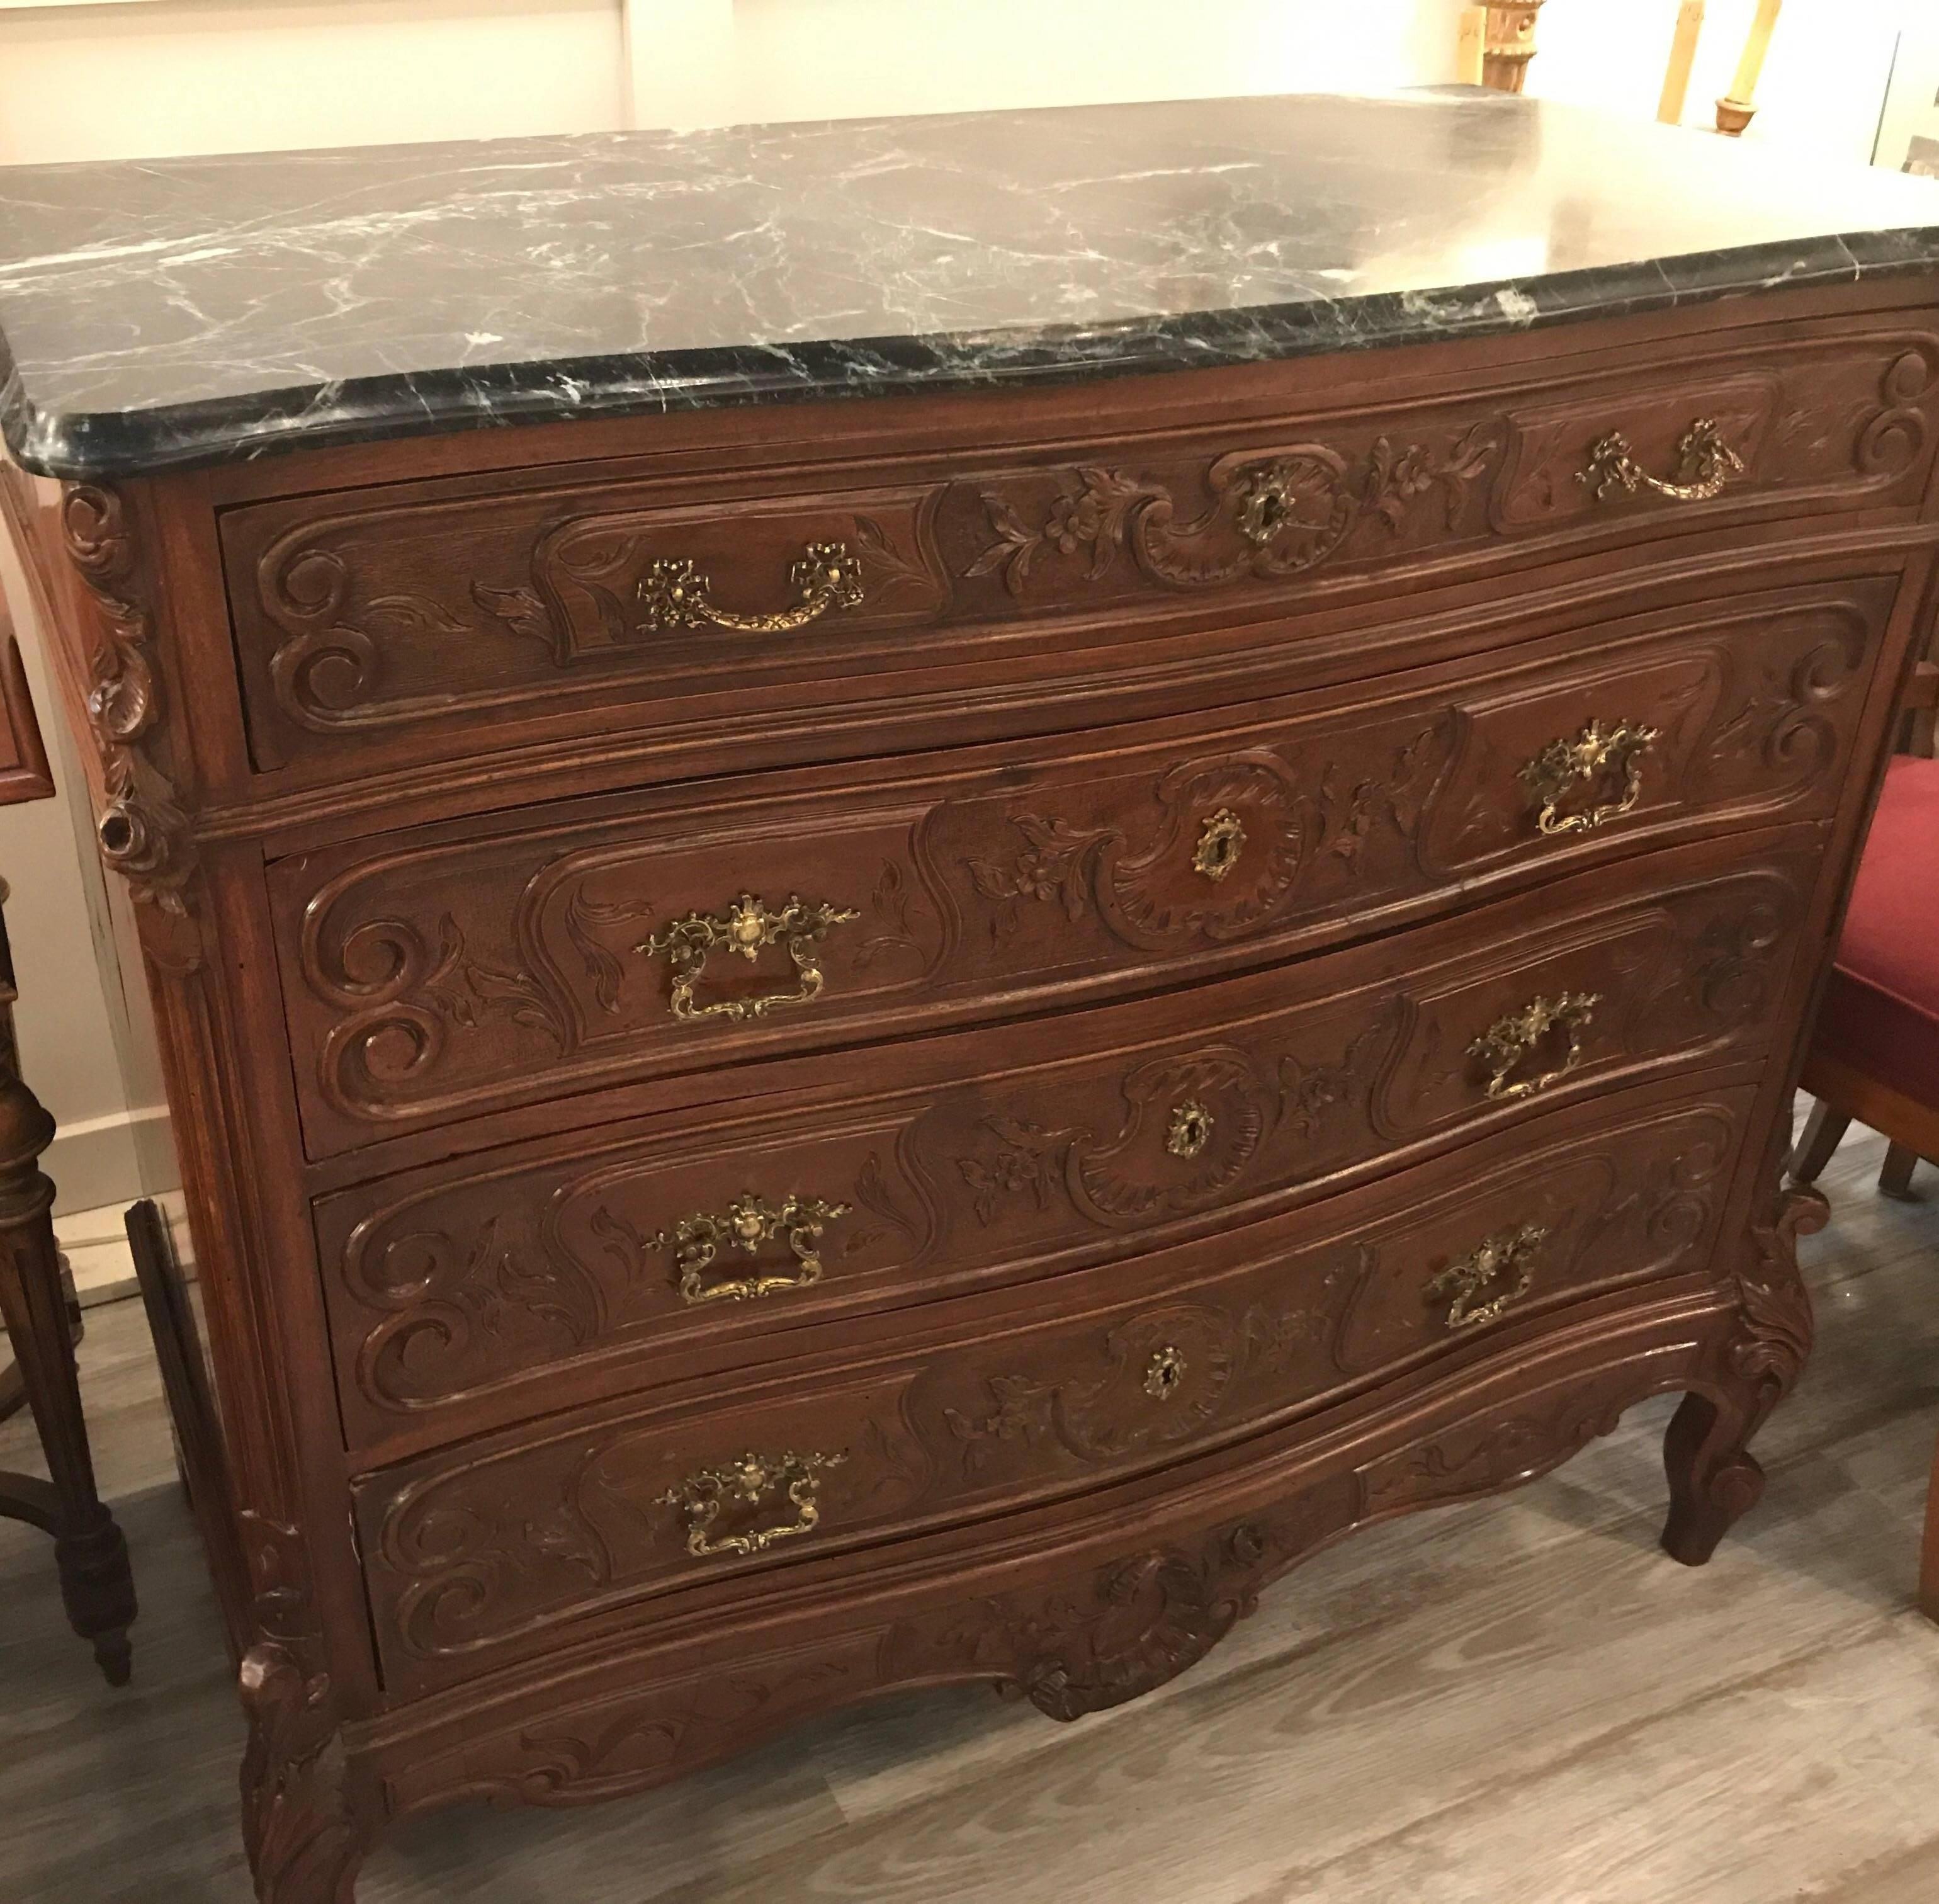 Beautiful hand carved French walnut console with marble top. Hand carved drawer fronts and carving on the corners, legs and bottom apron. The dark green marble top is original. Has its key to lock all four drawers.